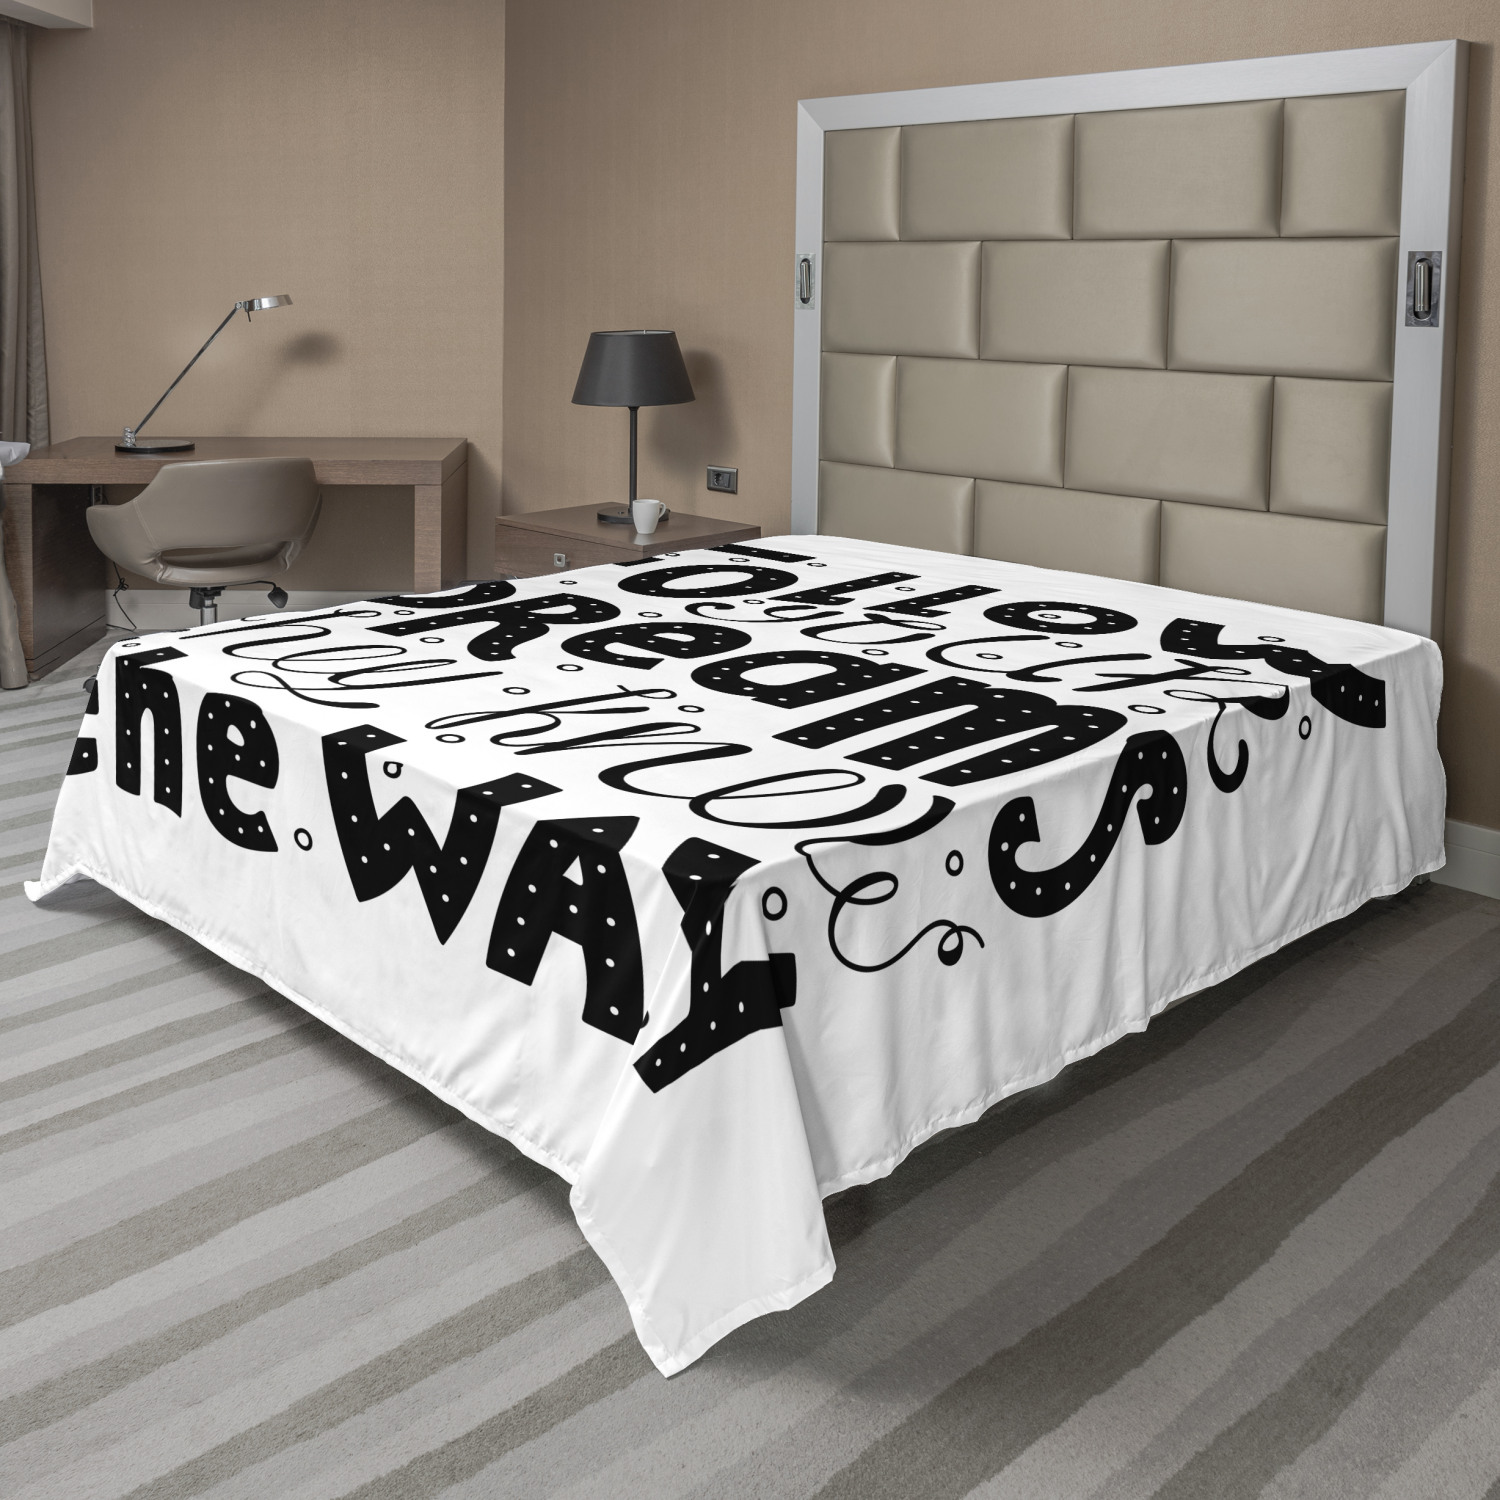 Details about   Ambesonne Typography Flat Sheet Top Sheet Decorative Bedding 6 Sizes 